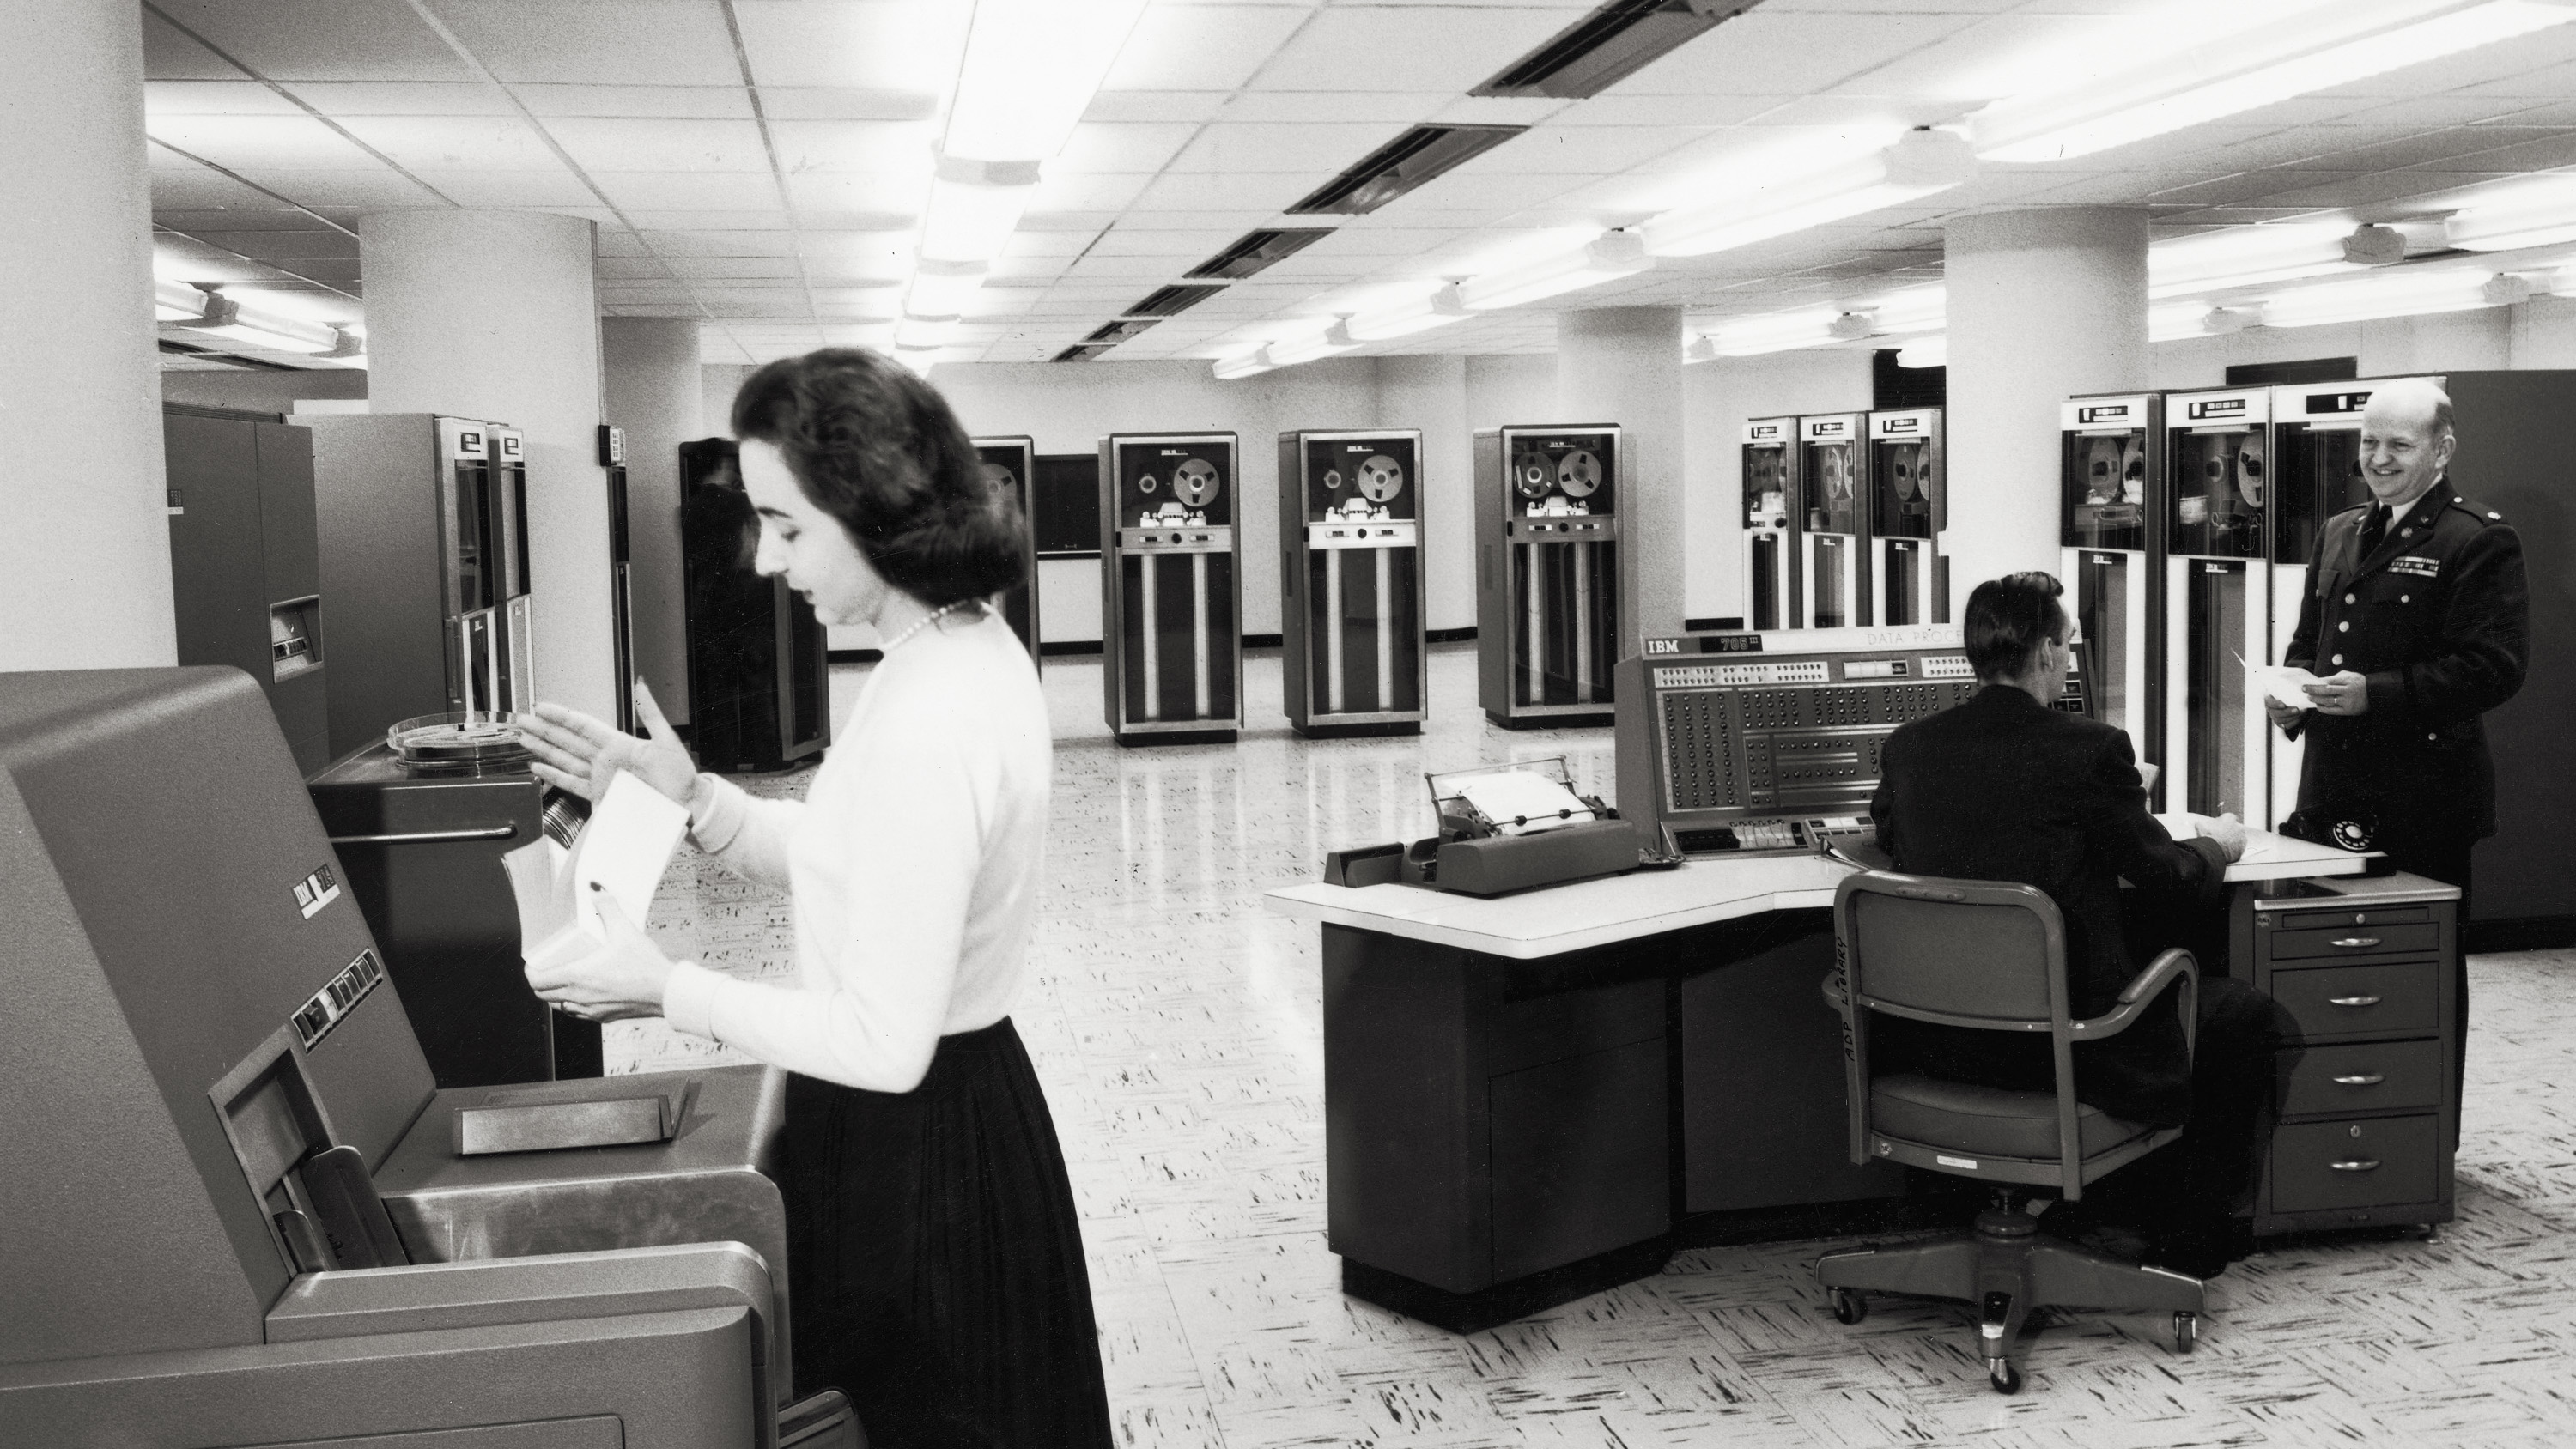 Female worker in the foreground of a room of 1950s era computers